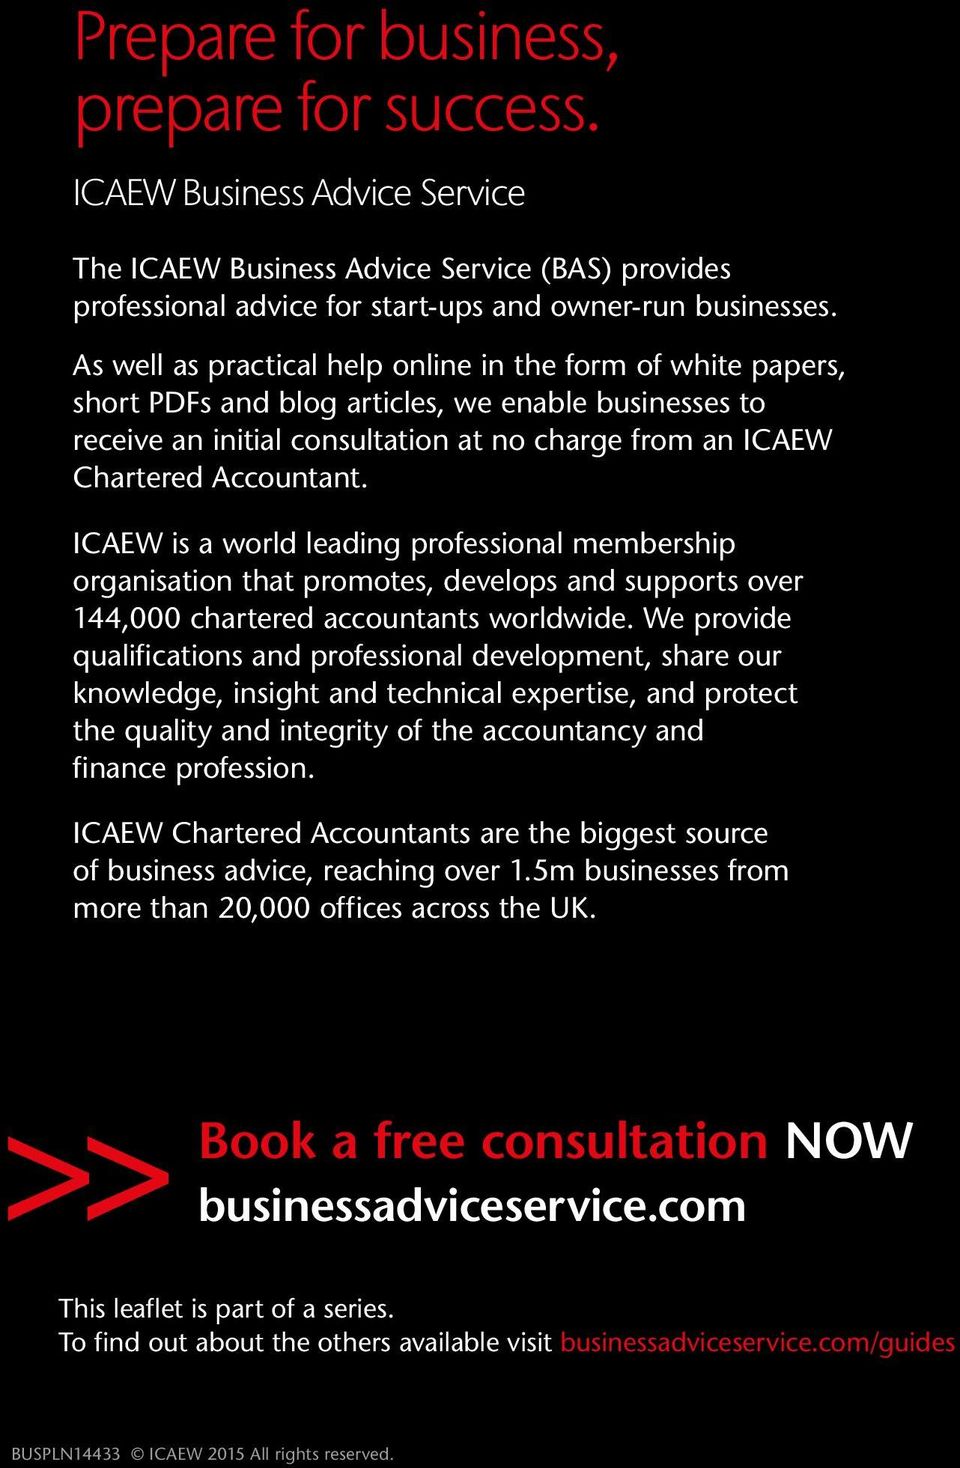 ICAEW is a world leading professional membership organisation that promotes, develops and supports over 144,000 chartered accountants worldwide.